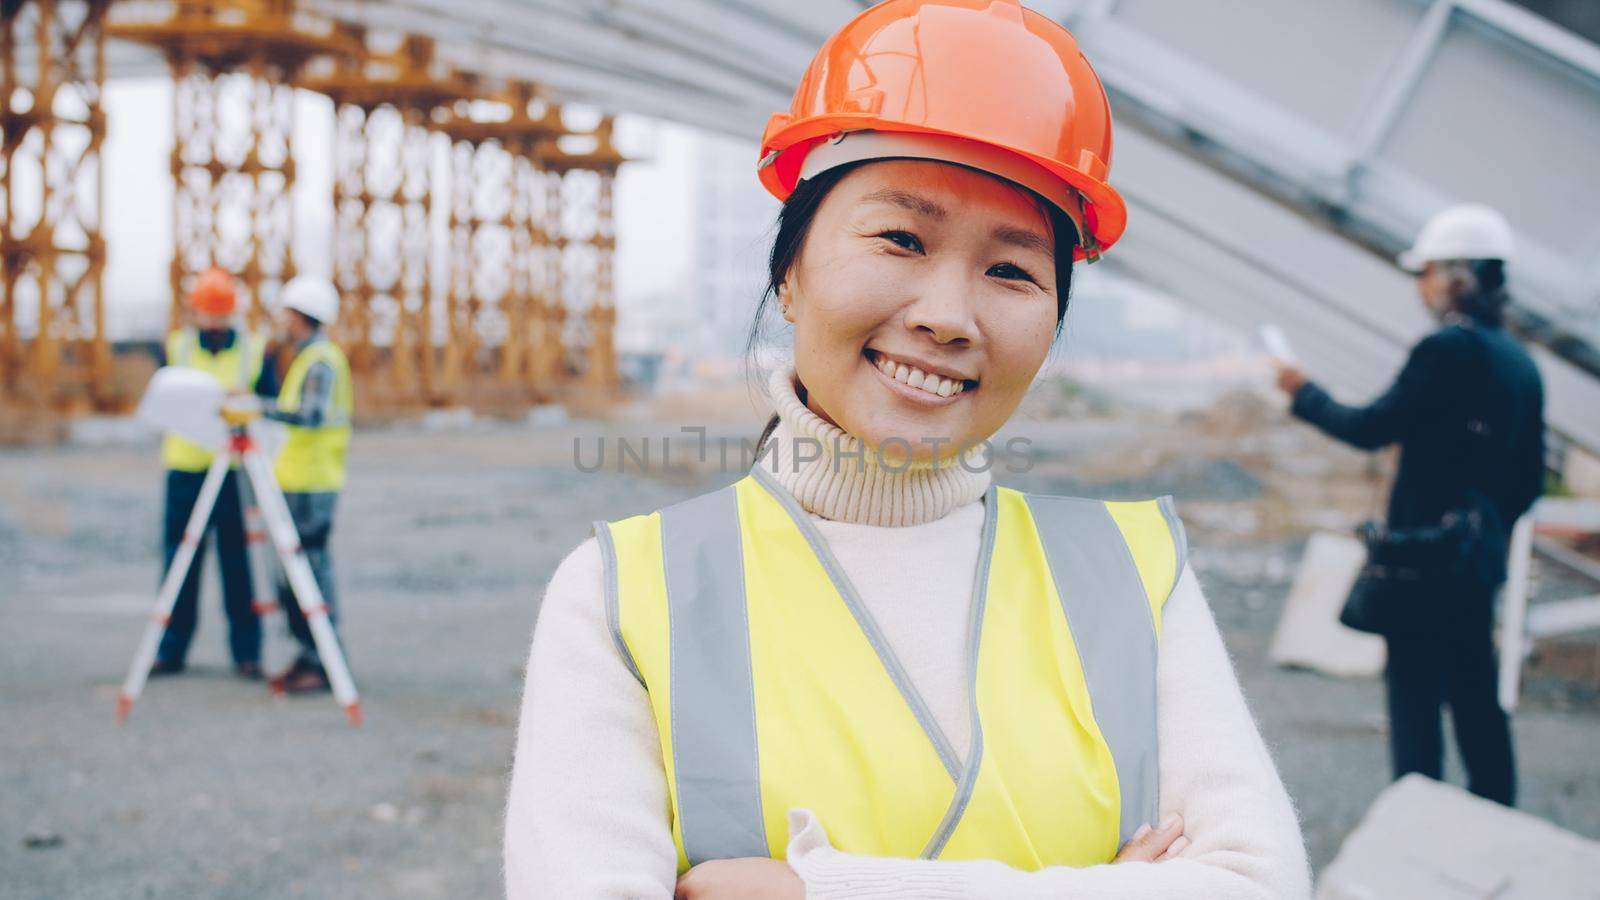 Cheerful Asian construction worker wearing uniform smiling at construction site while people working in background by silverkblack